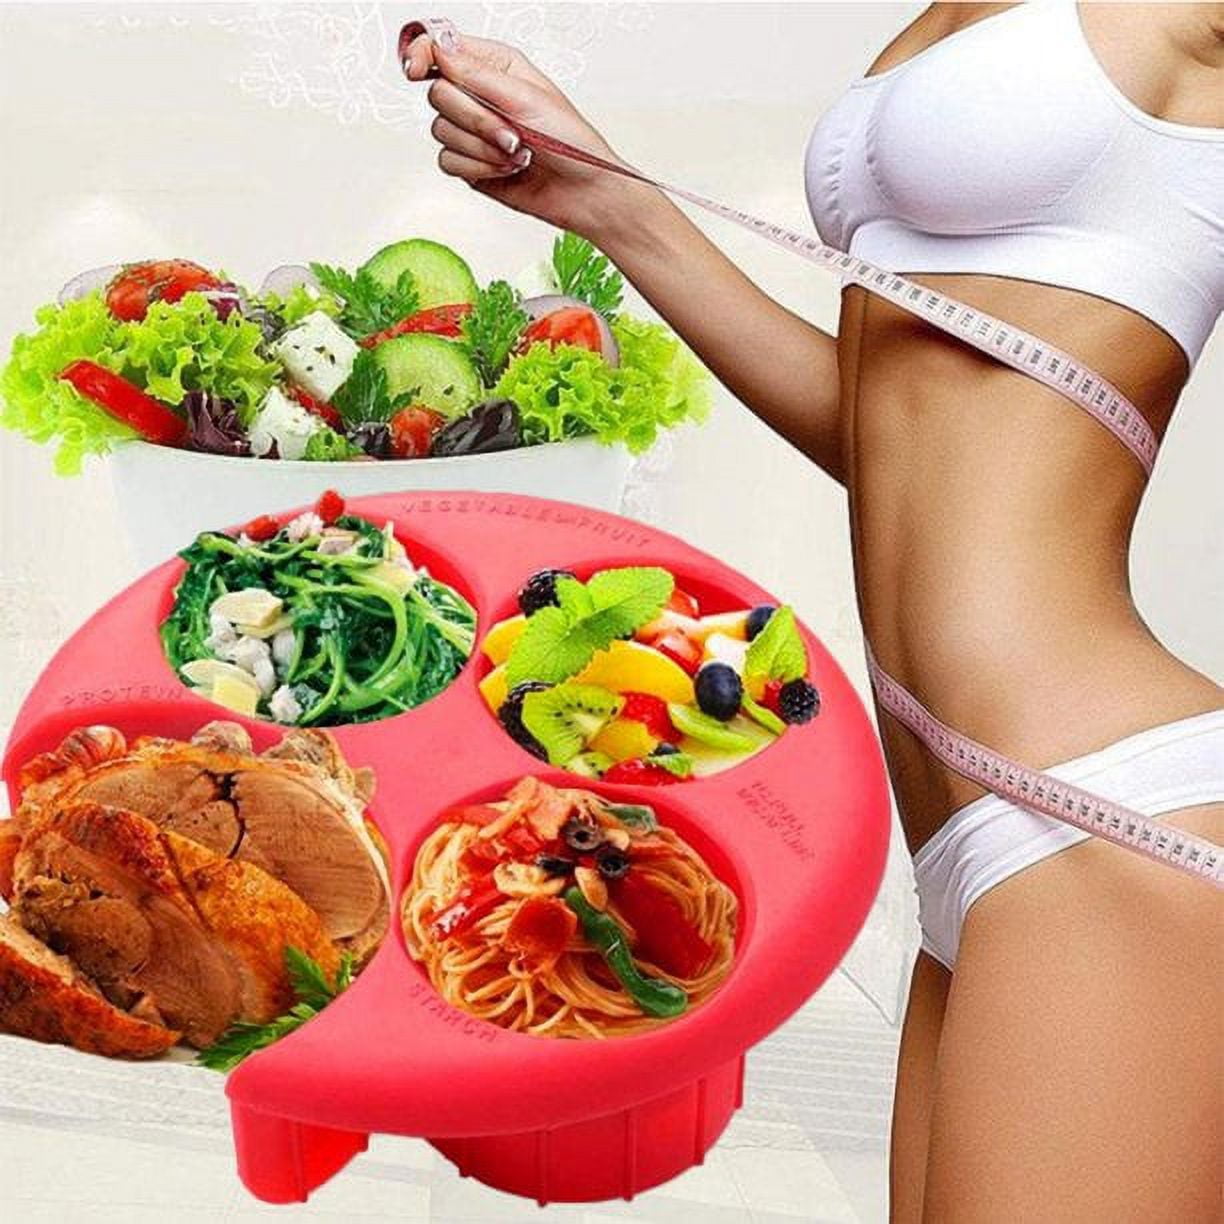 portion control plate<br>portion plate<br>portion food plate<br>food portion plates<br>adult portion plate<br>portion bowls<br>portion size plates<br>portion plates for weight loss<br>plate portion for weight loss<br>portion control plate for weight loss<br>meal portion plate